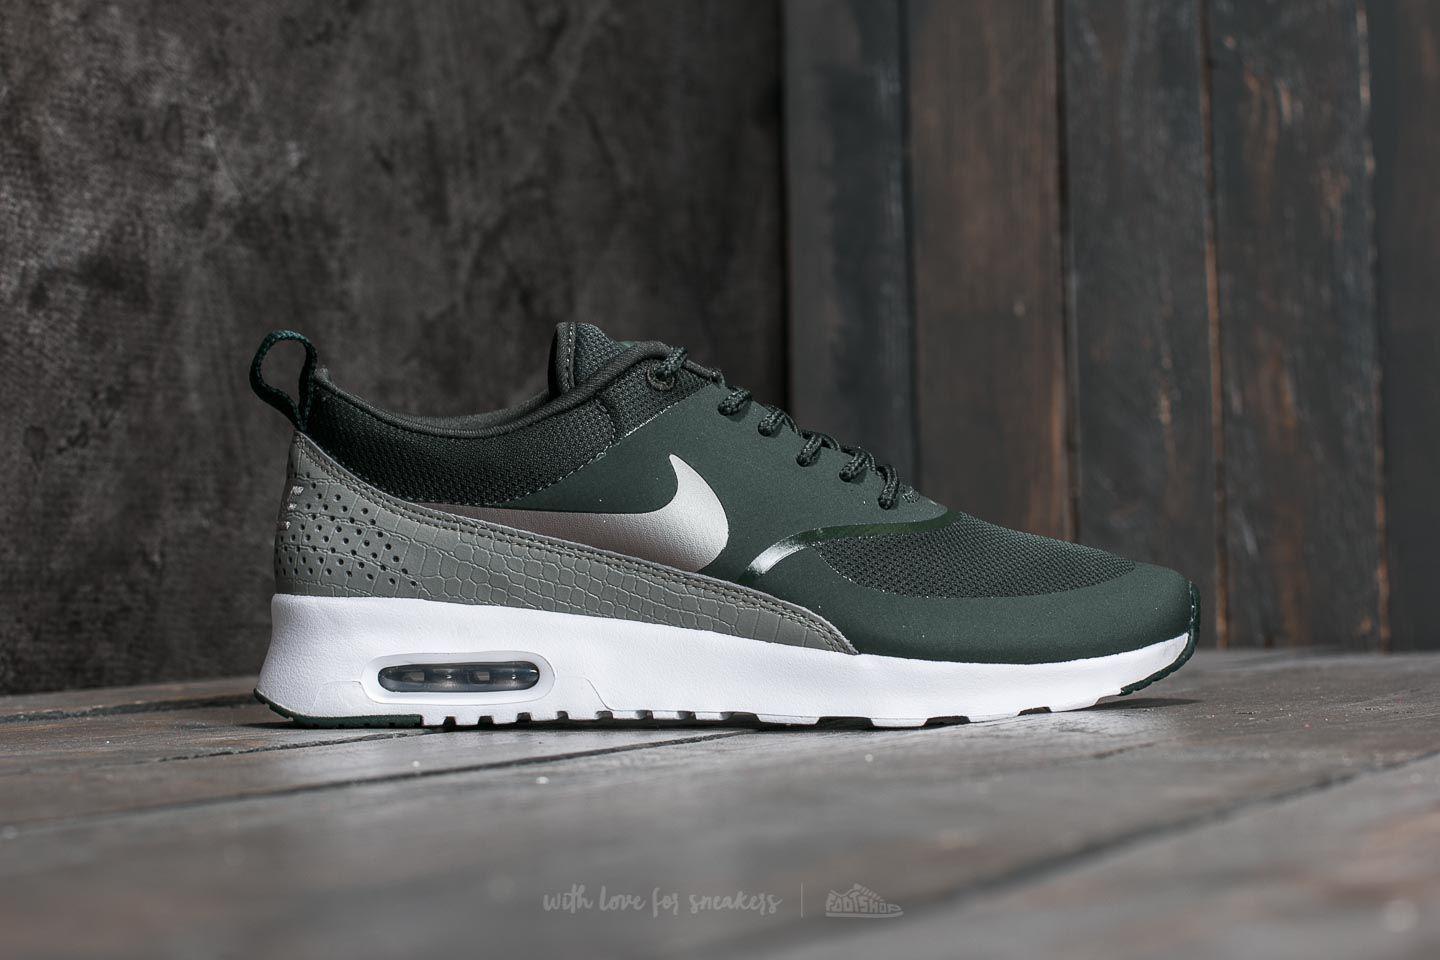 Nike Rubber W Air Max Thea Outdoor Green/ Metallic Pewter - Lyst